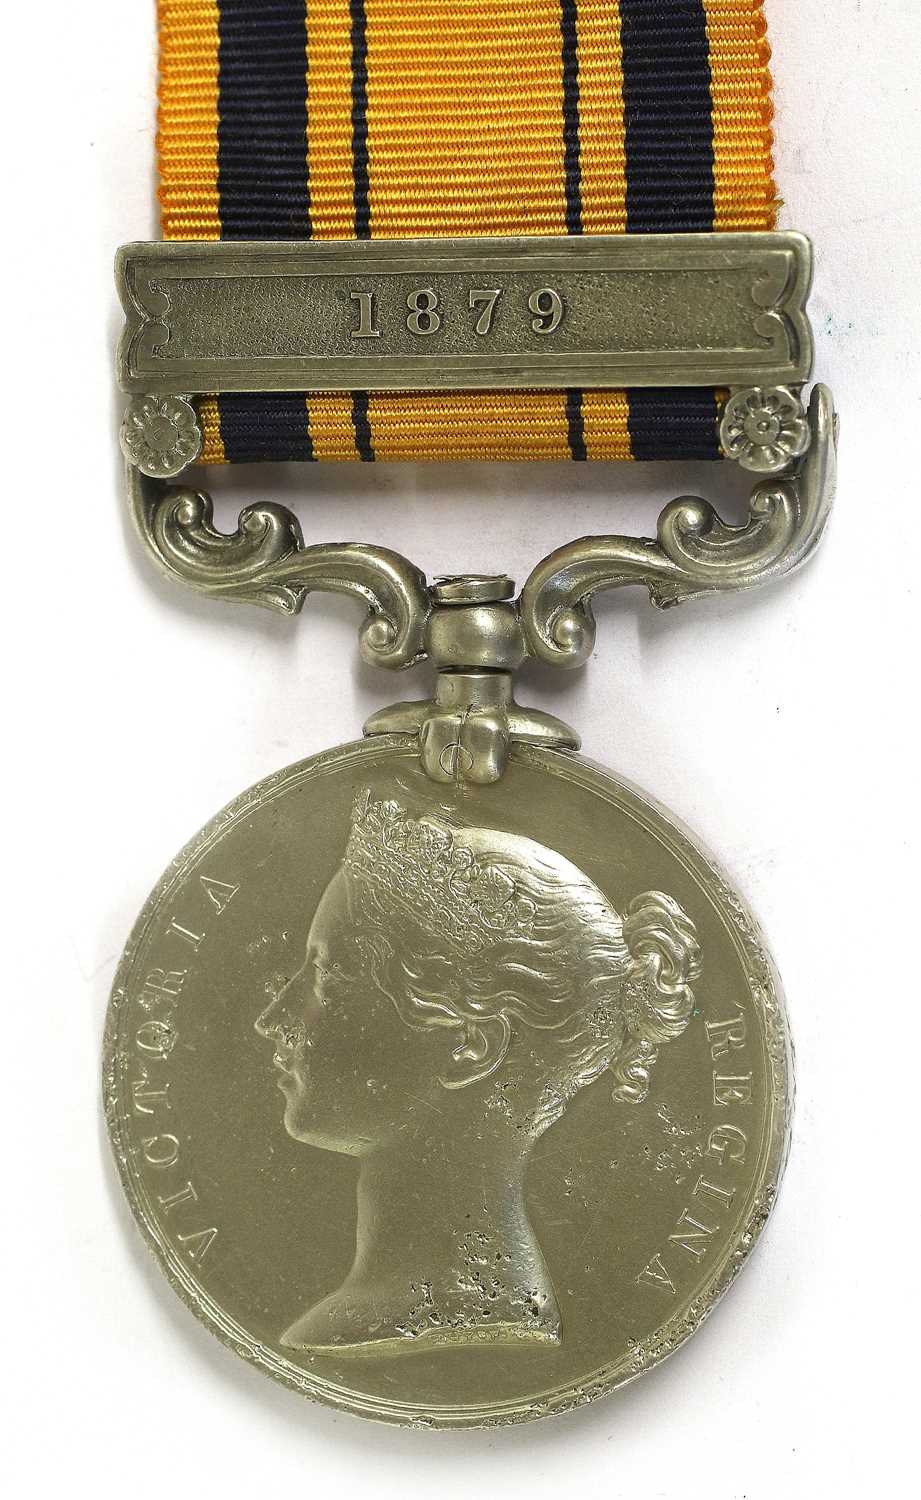 Lot 61 - A South Africa Medal 1877-79, with clasp 1879,...